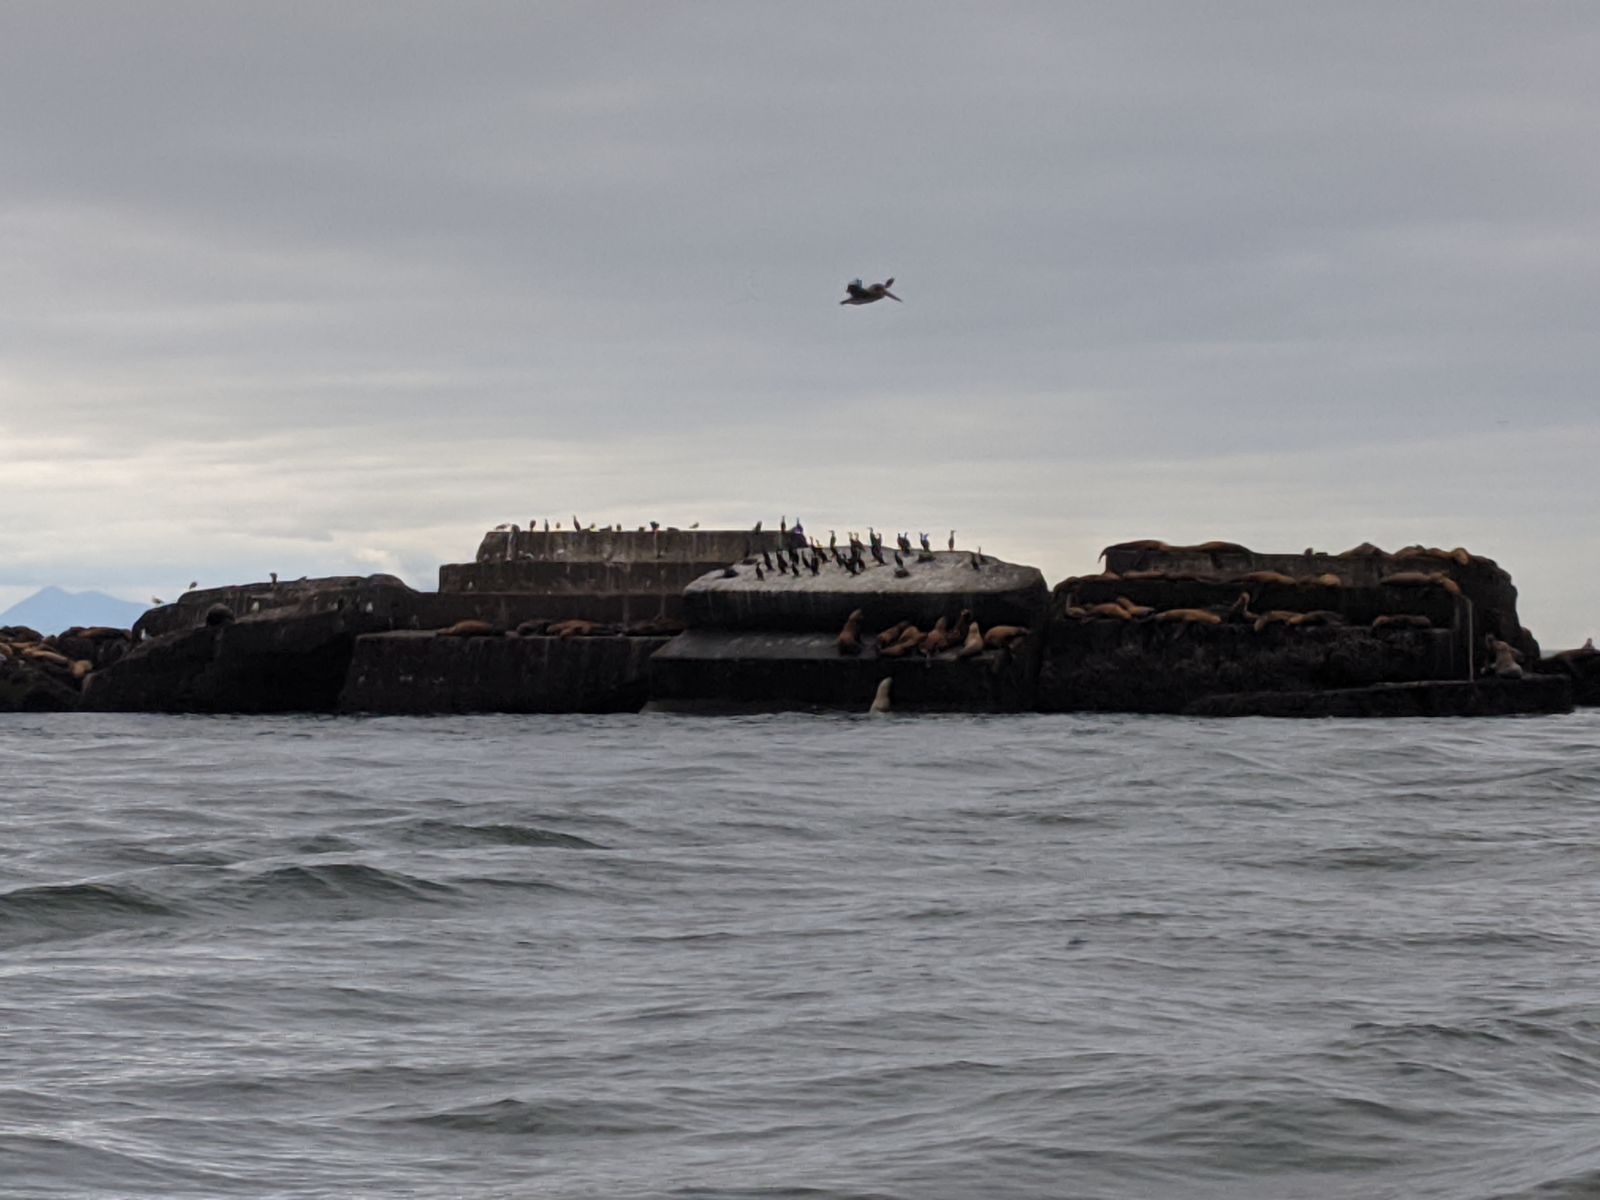 See all those gray, pale, and white blobs? Those are all seals. Bonus gray pelican above!